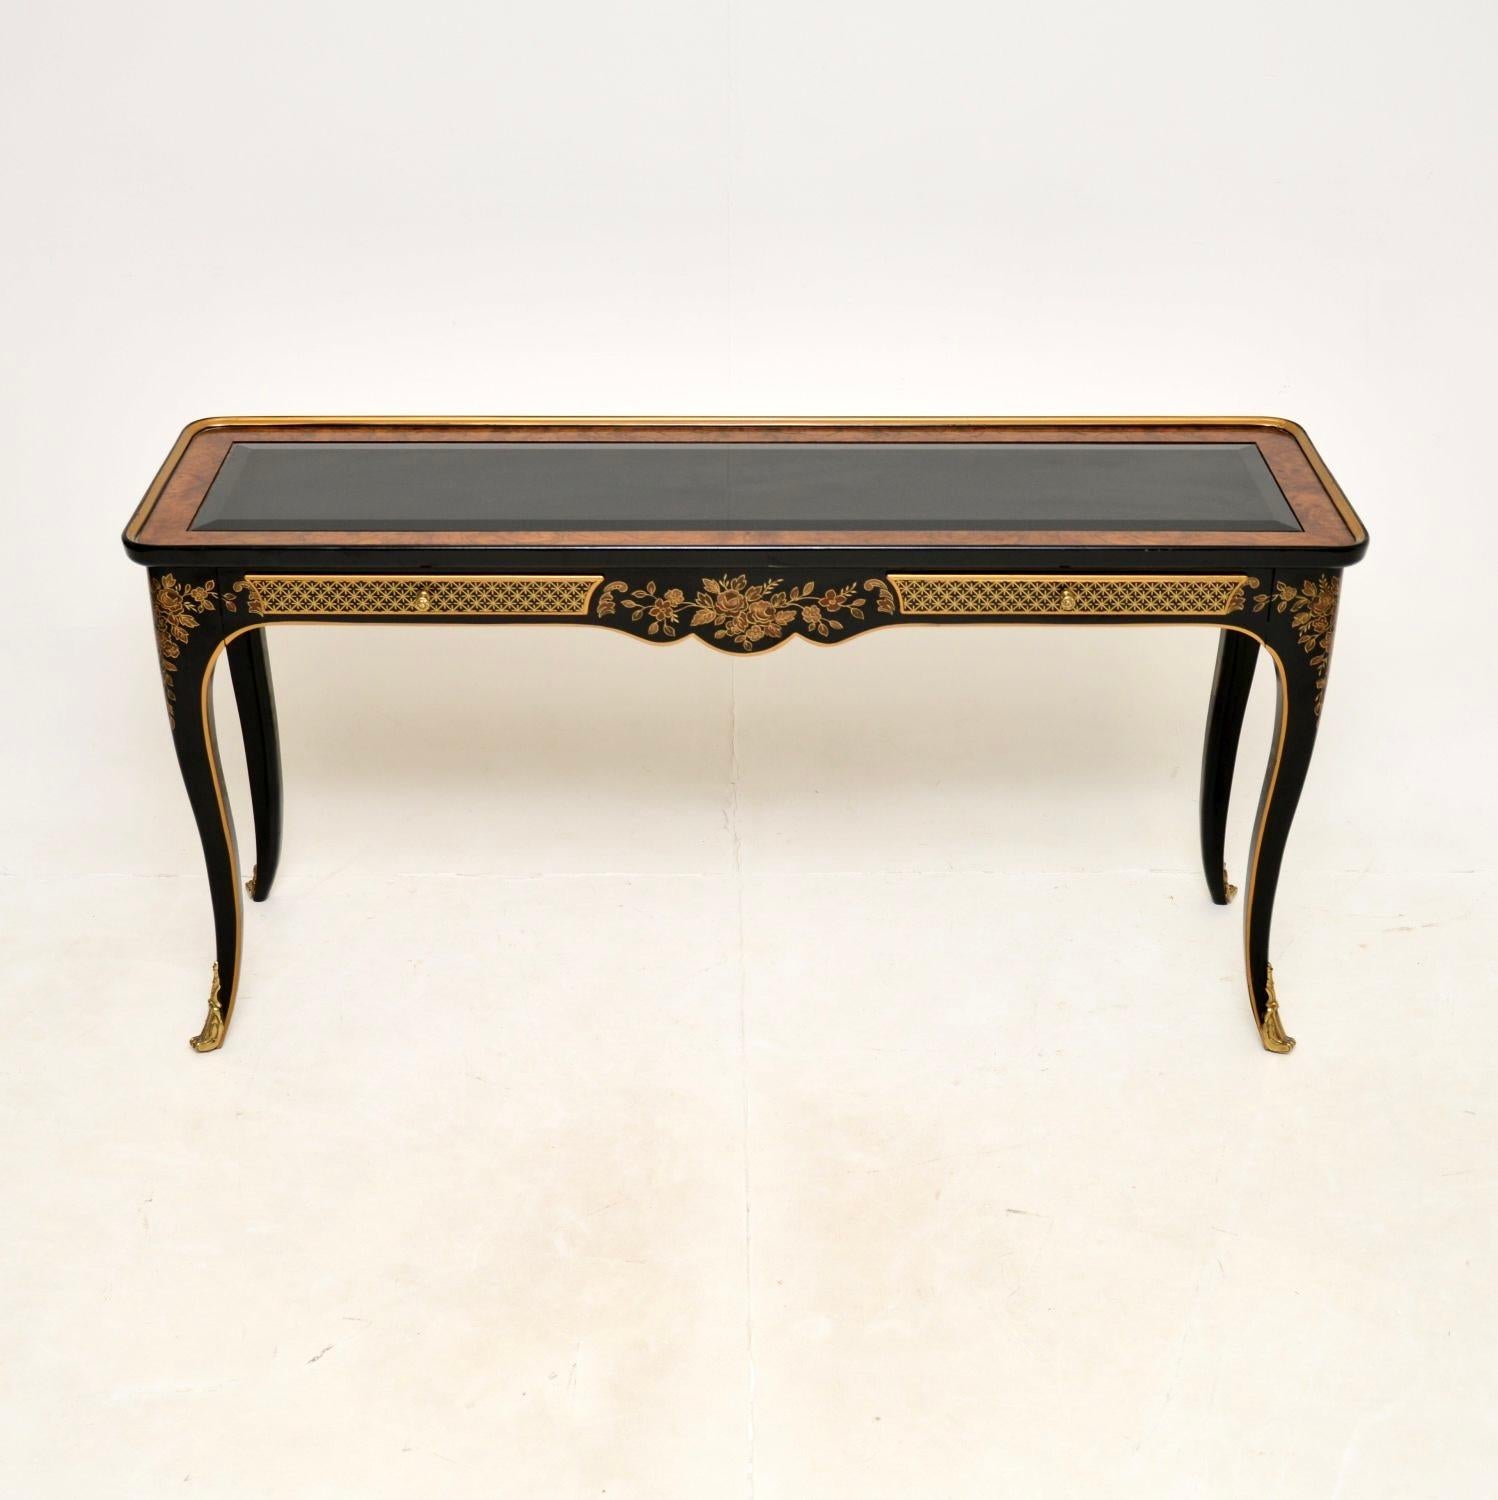 A stunning antique French style lacquered chinoiserie console table. This was made in the USA by Drexel, it dates from around the 1970’s.

This is of superb quality, we obtained it privately from an amazing private residence in Knightsbridge. It is